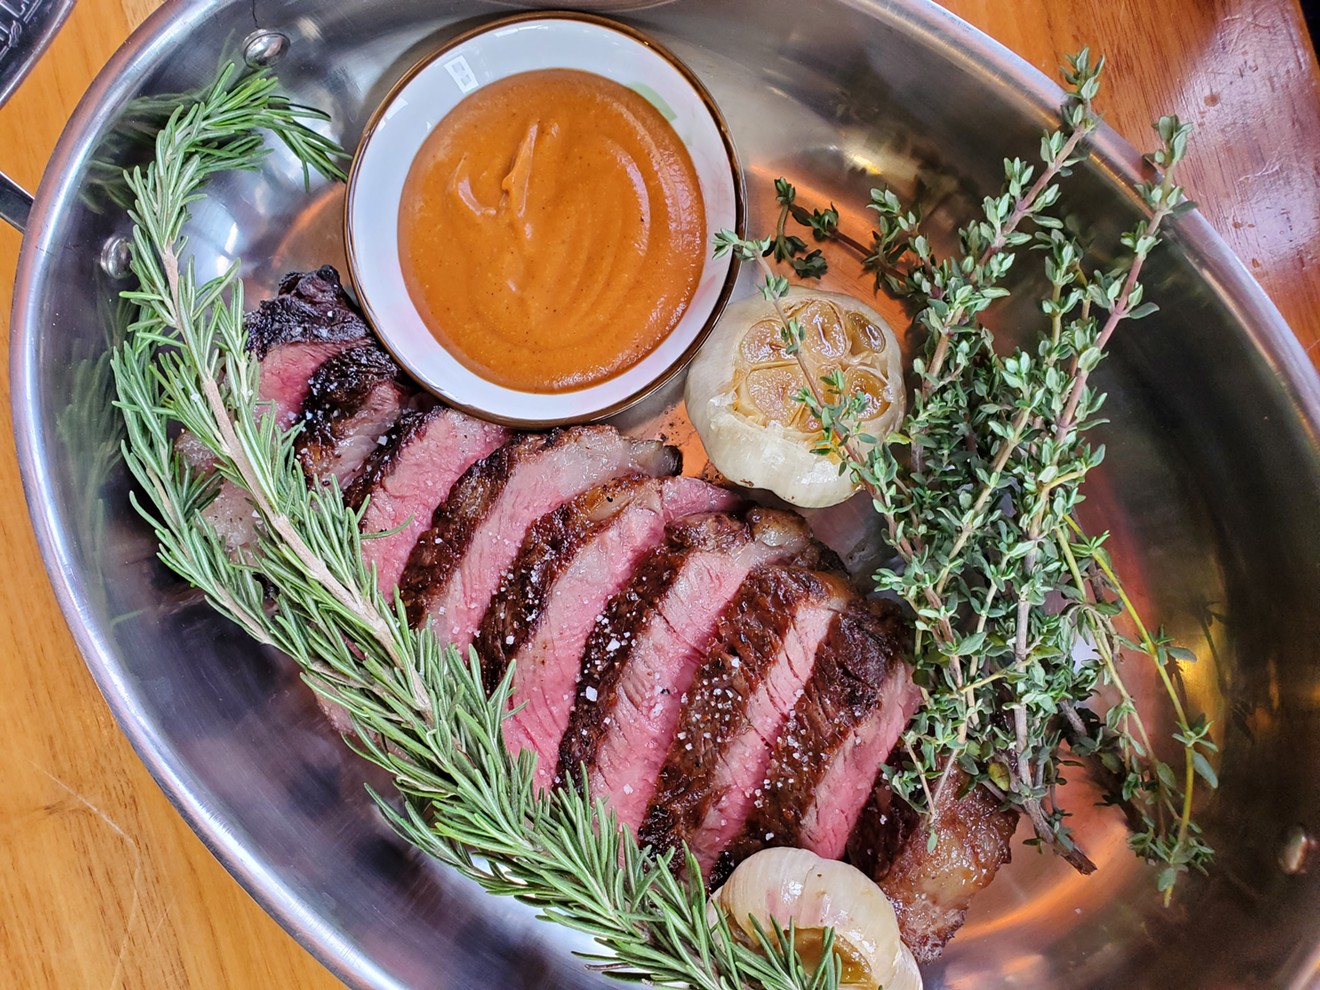 Steak is served with roasted garlic and fresh rosemary and thyme.